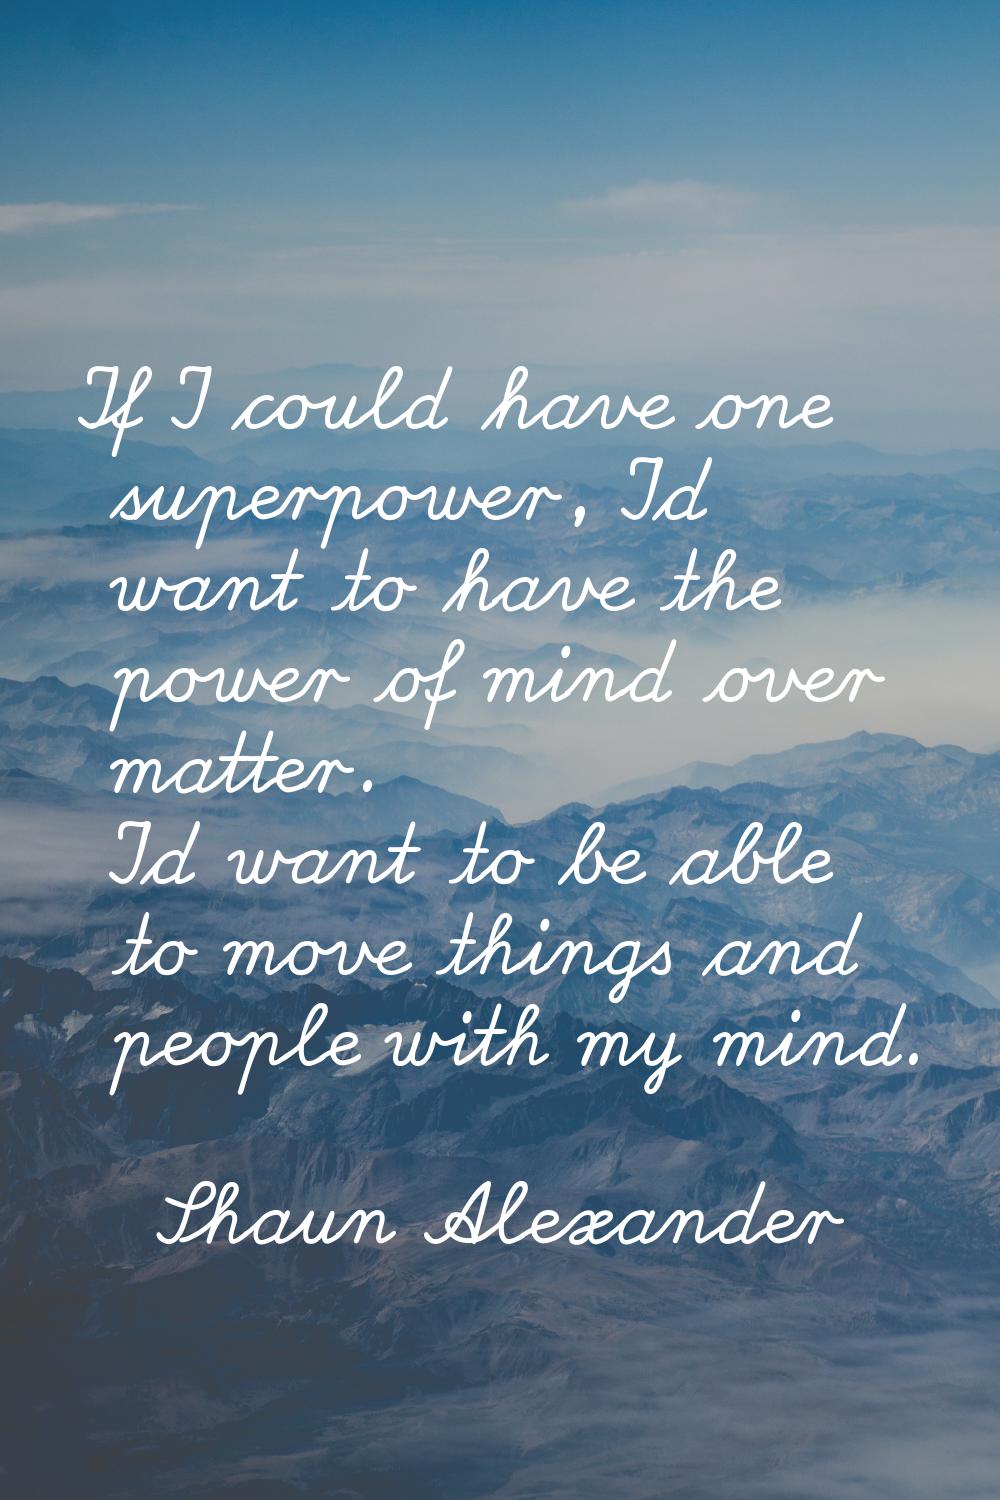 If I could have one superpower, I'd want to have the power of mind over matter. I'd want to be able